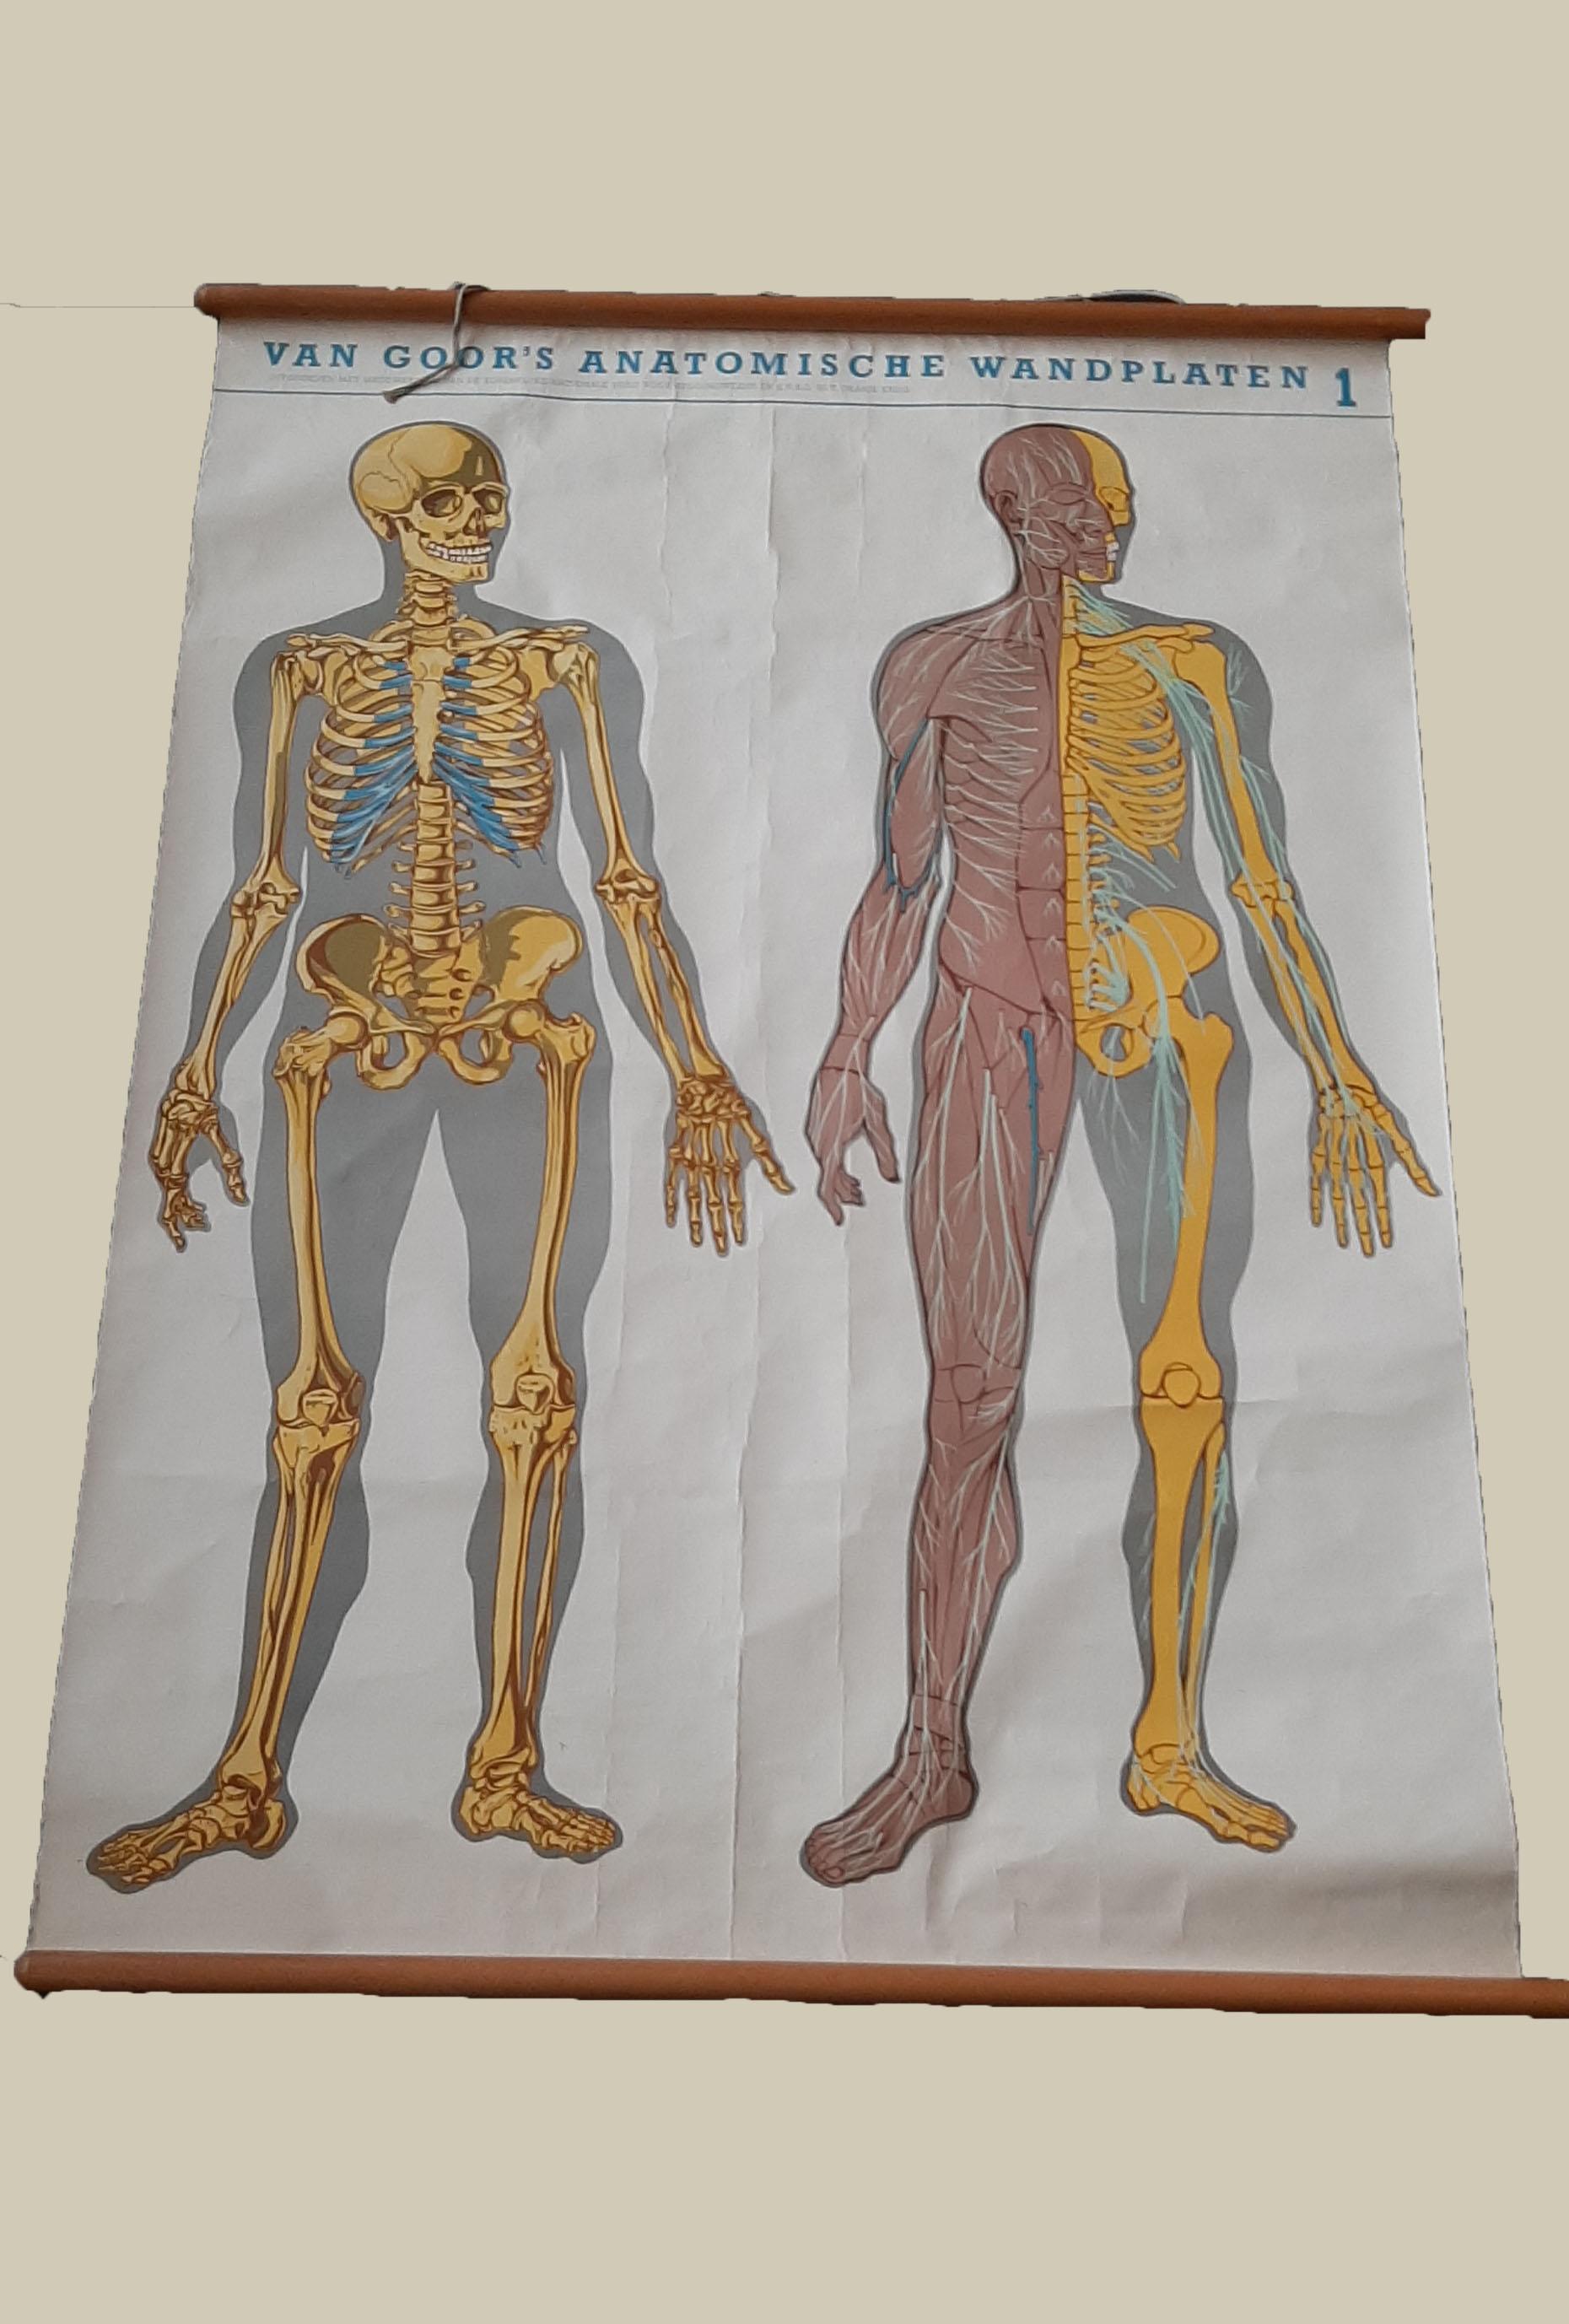 Set of two large medical prints published by Van Goor, circa 1930. The first print depicts the nervous system and measures circa 87 x 122 cm (34.3 x 48 inch). The second print depicts the muscular system and measures circa 87 x 133 cm (34.3 x 52.4